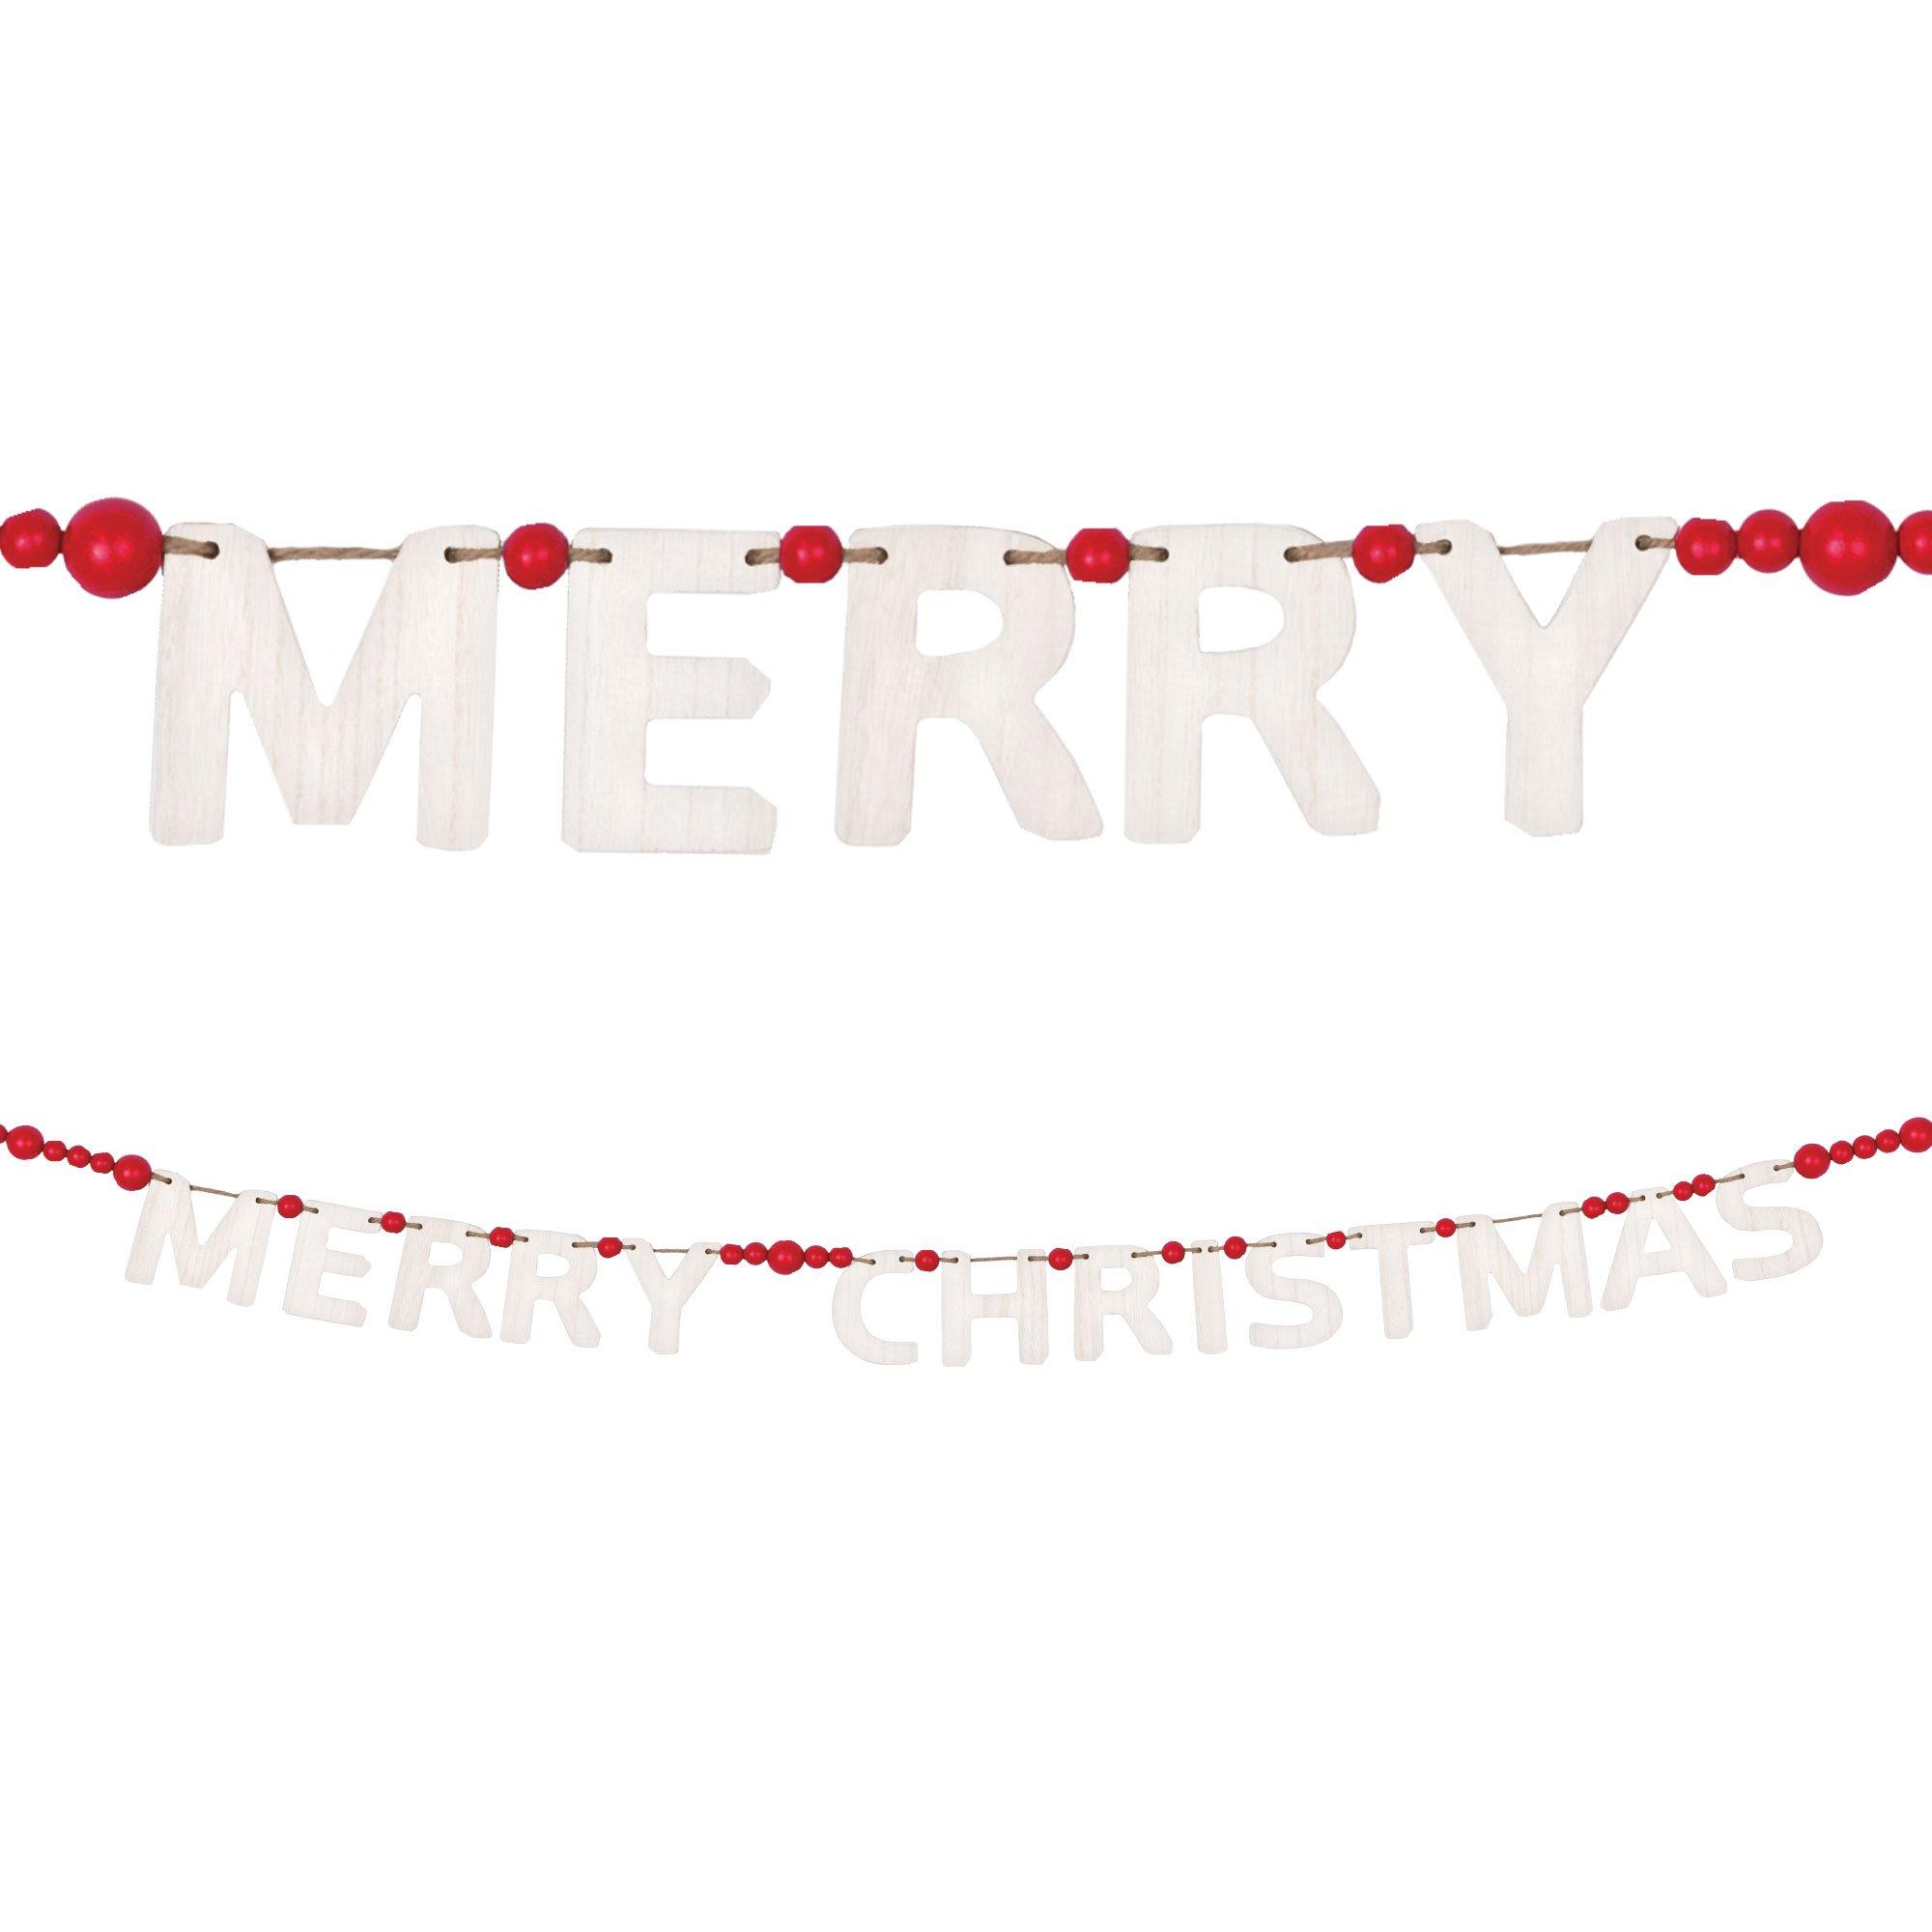 Red Bead & White Letter Merry Christmas Wood Banner, 10ft | Party City